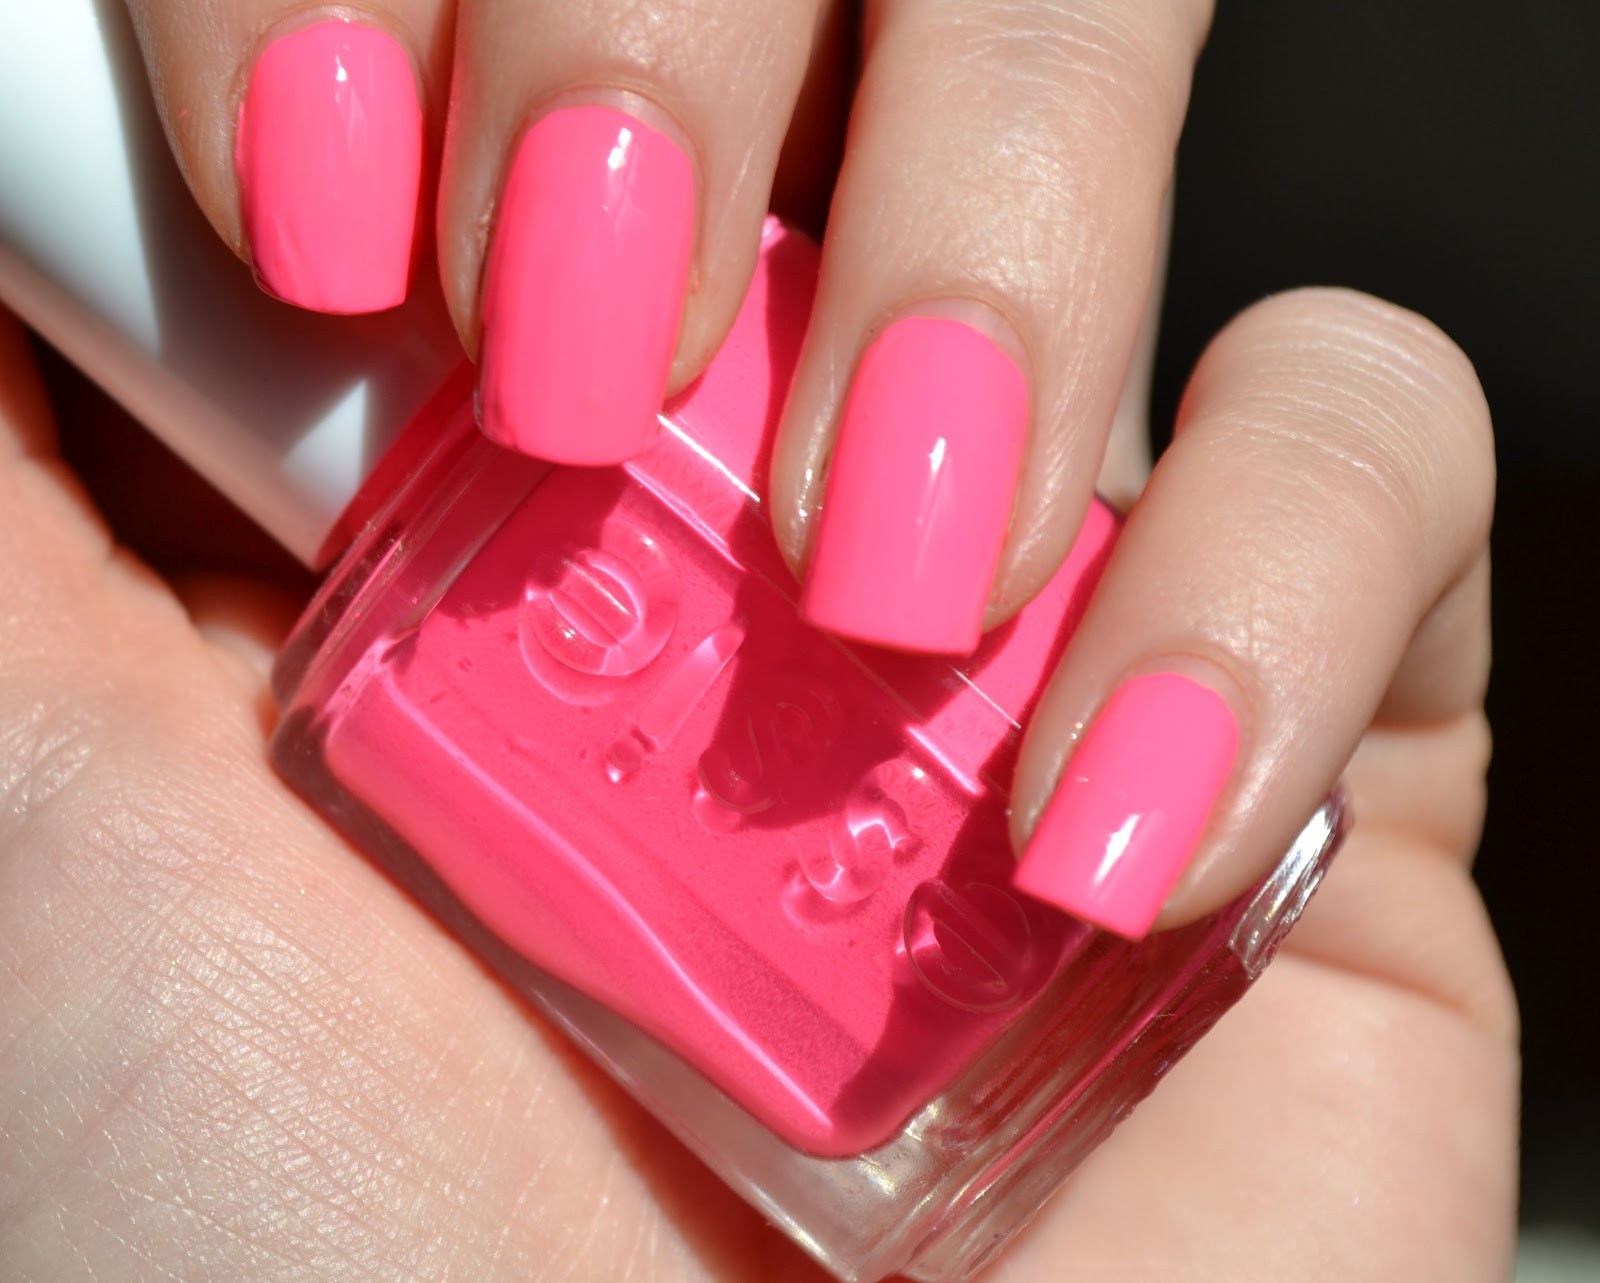 10. Sinful Colors Pink Forever - wide 7